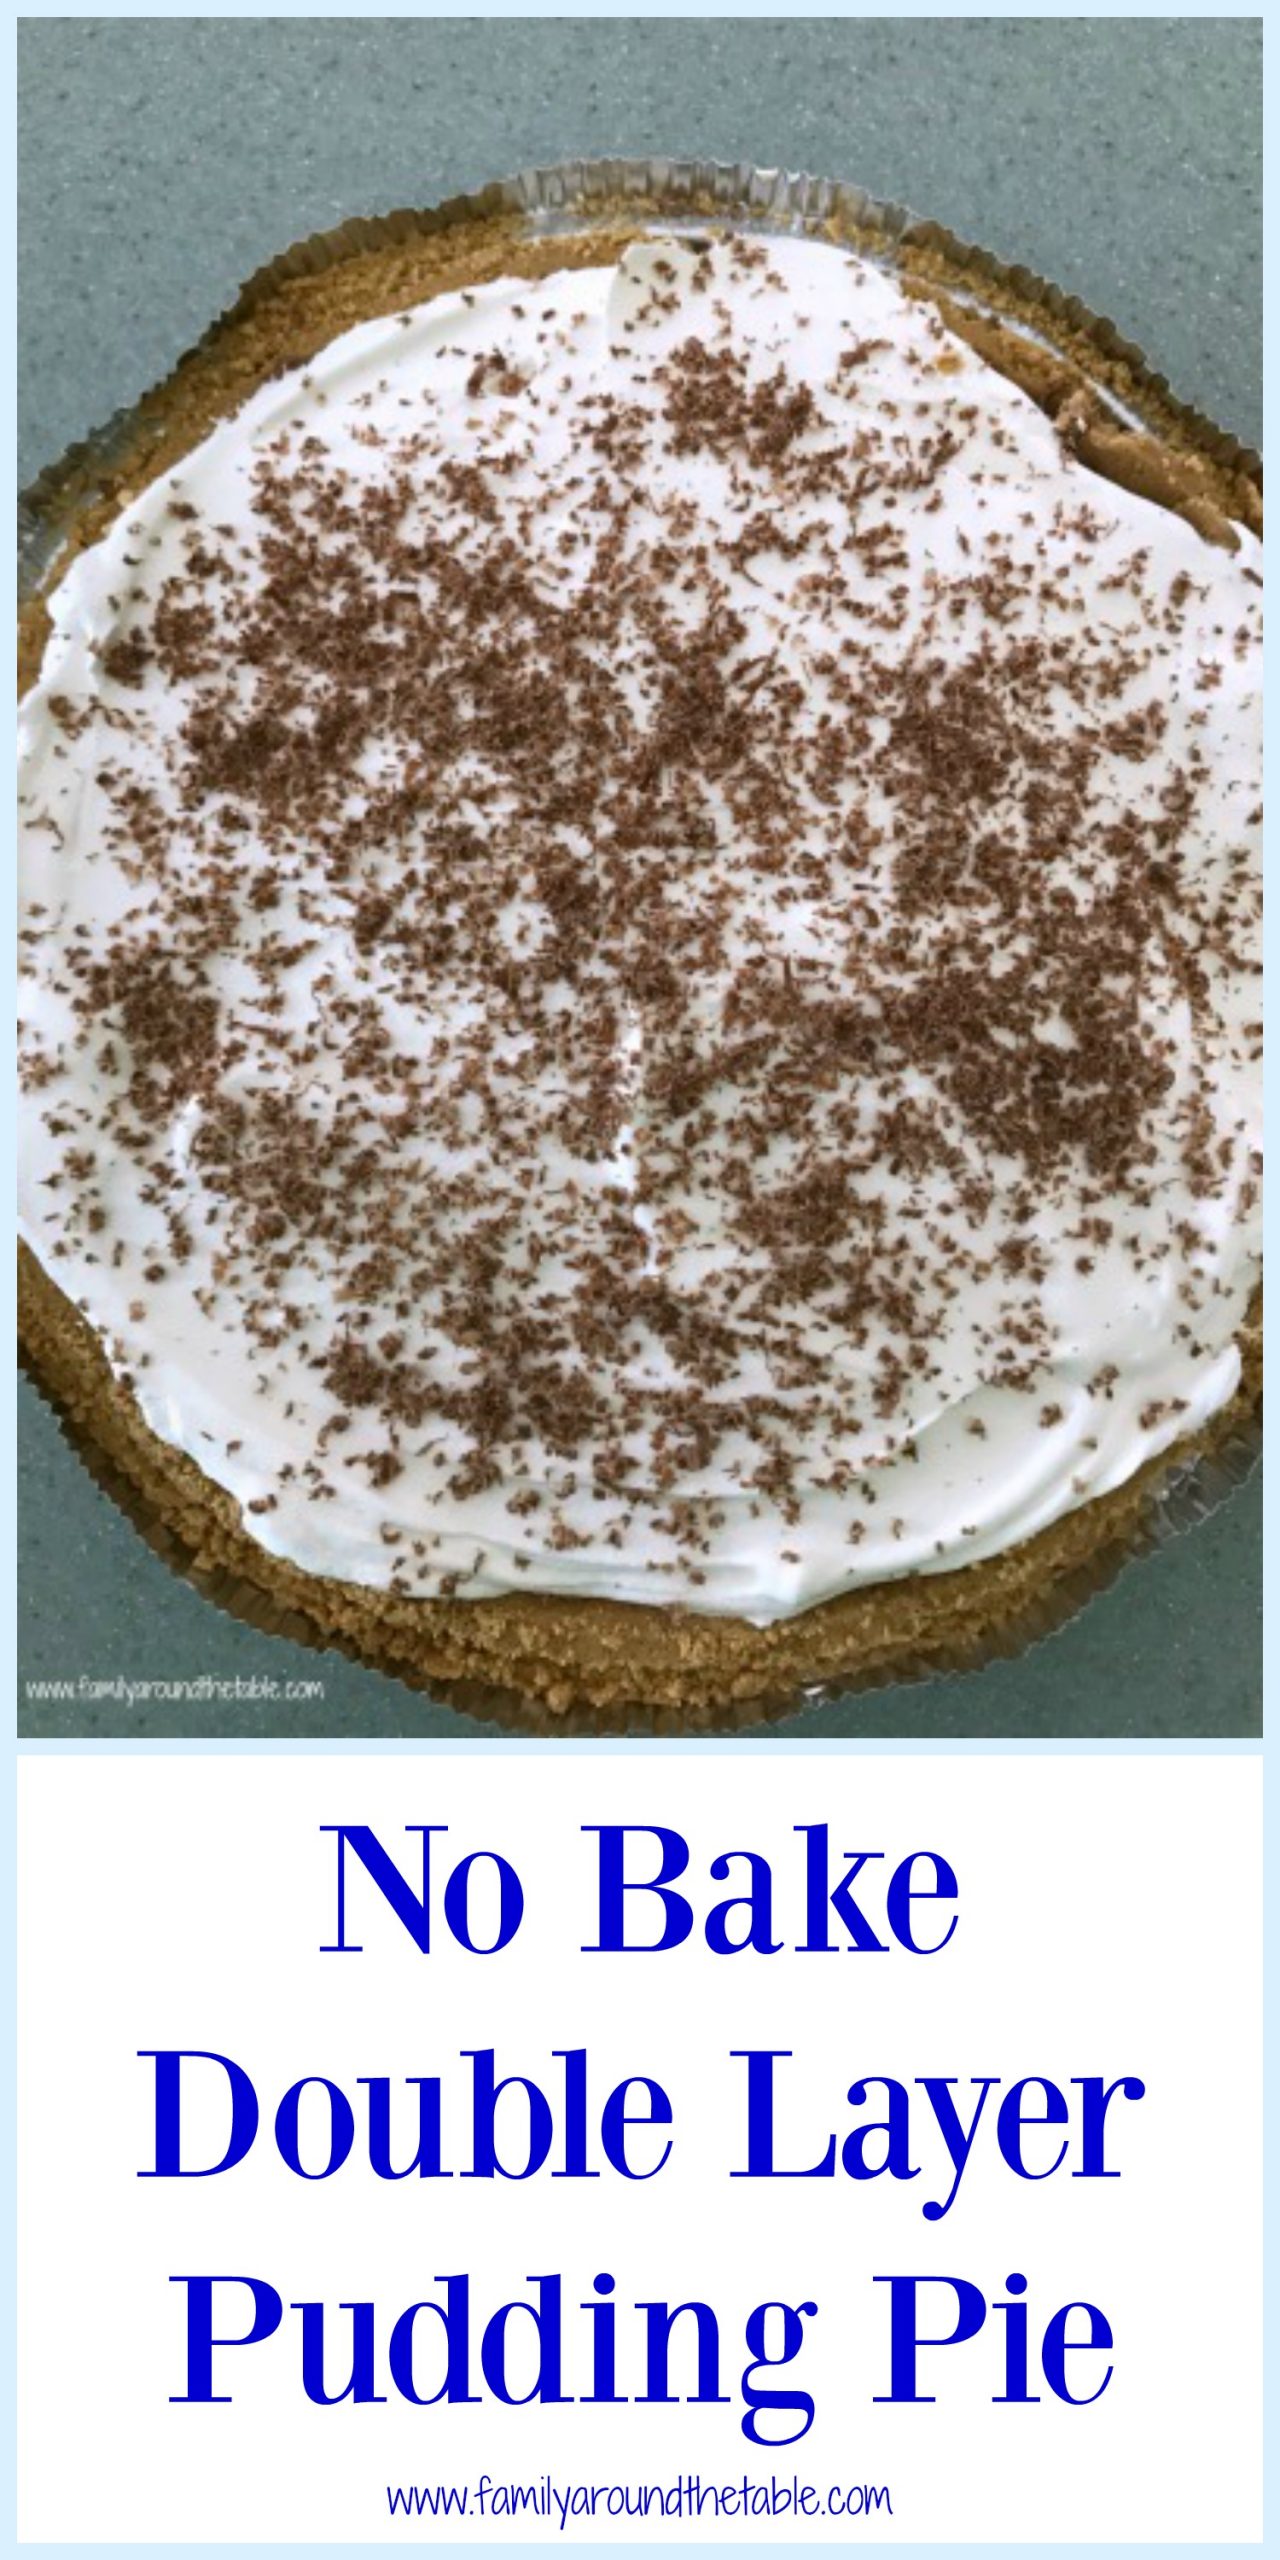 No bake double layer pudding pie is perfect for any pot luck occasion.